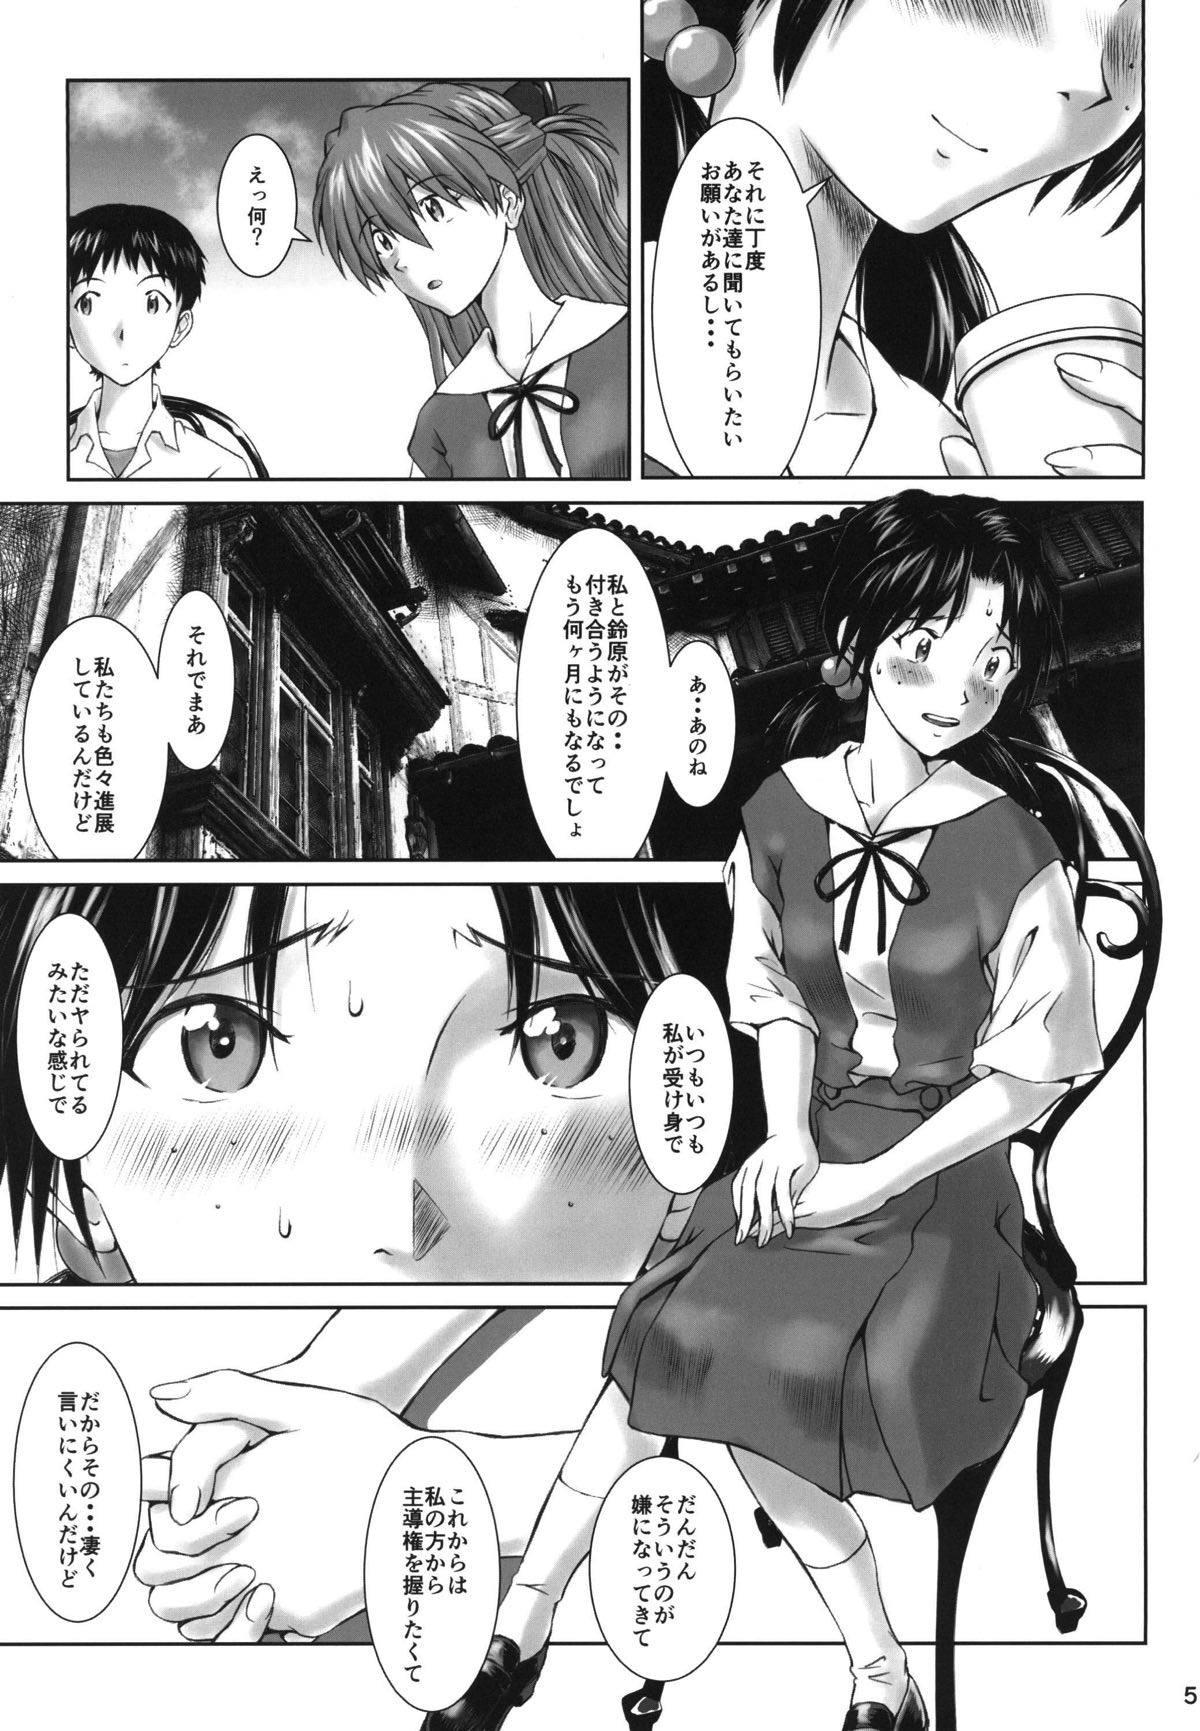 Girlfriends Let's share it - Neon genesis evangelion Thick - Page 4